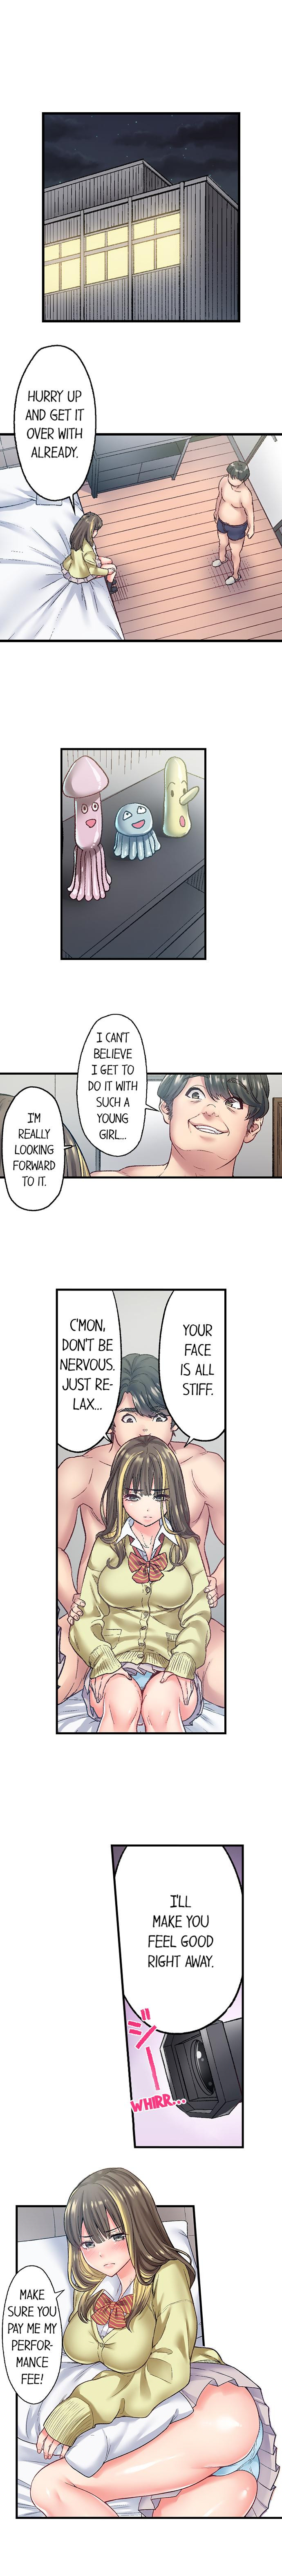 The Porn Star Reincarnated Into a Bullied Boy - Chapter 7 Page 9